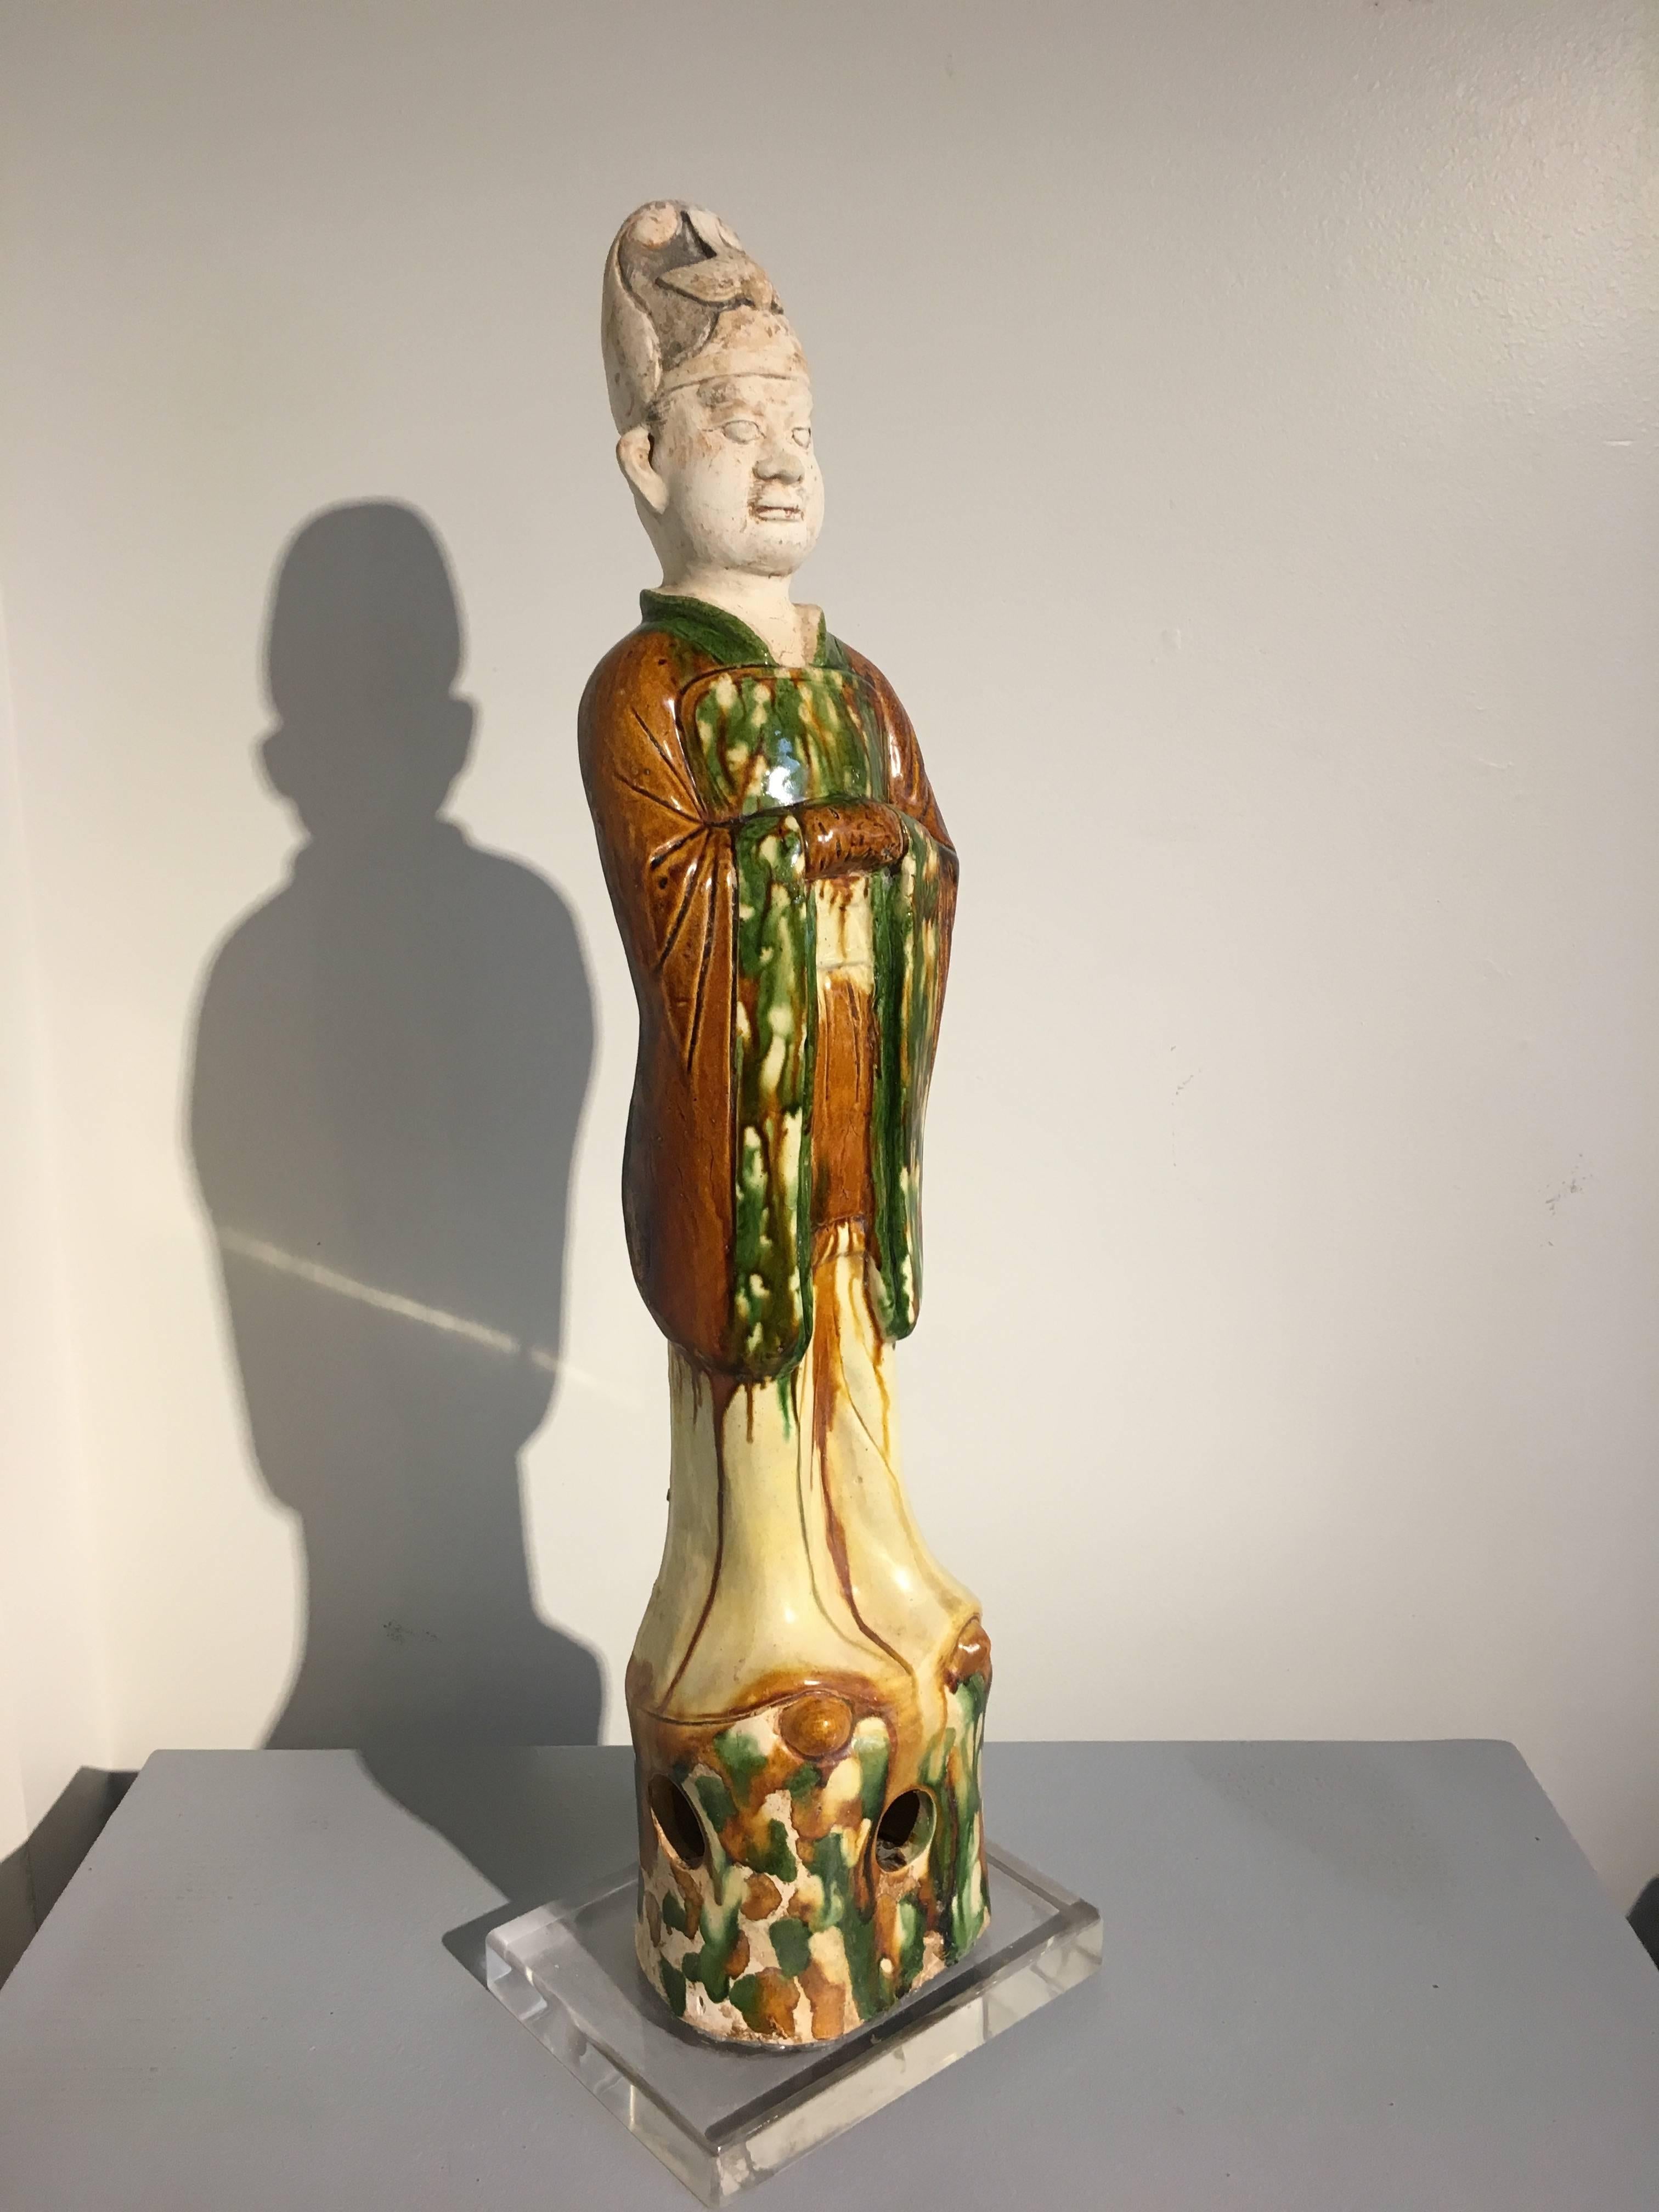 A Tang dynasty sancai (three color) glazed pottery model of a Taoist official, TL tested by Oxford Authentication. The figure is portrayed standing upon an openwork base in an attentive position, dressed in loose fitting robes, his clasped hands in